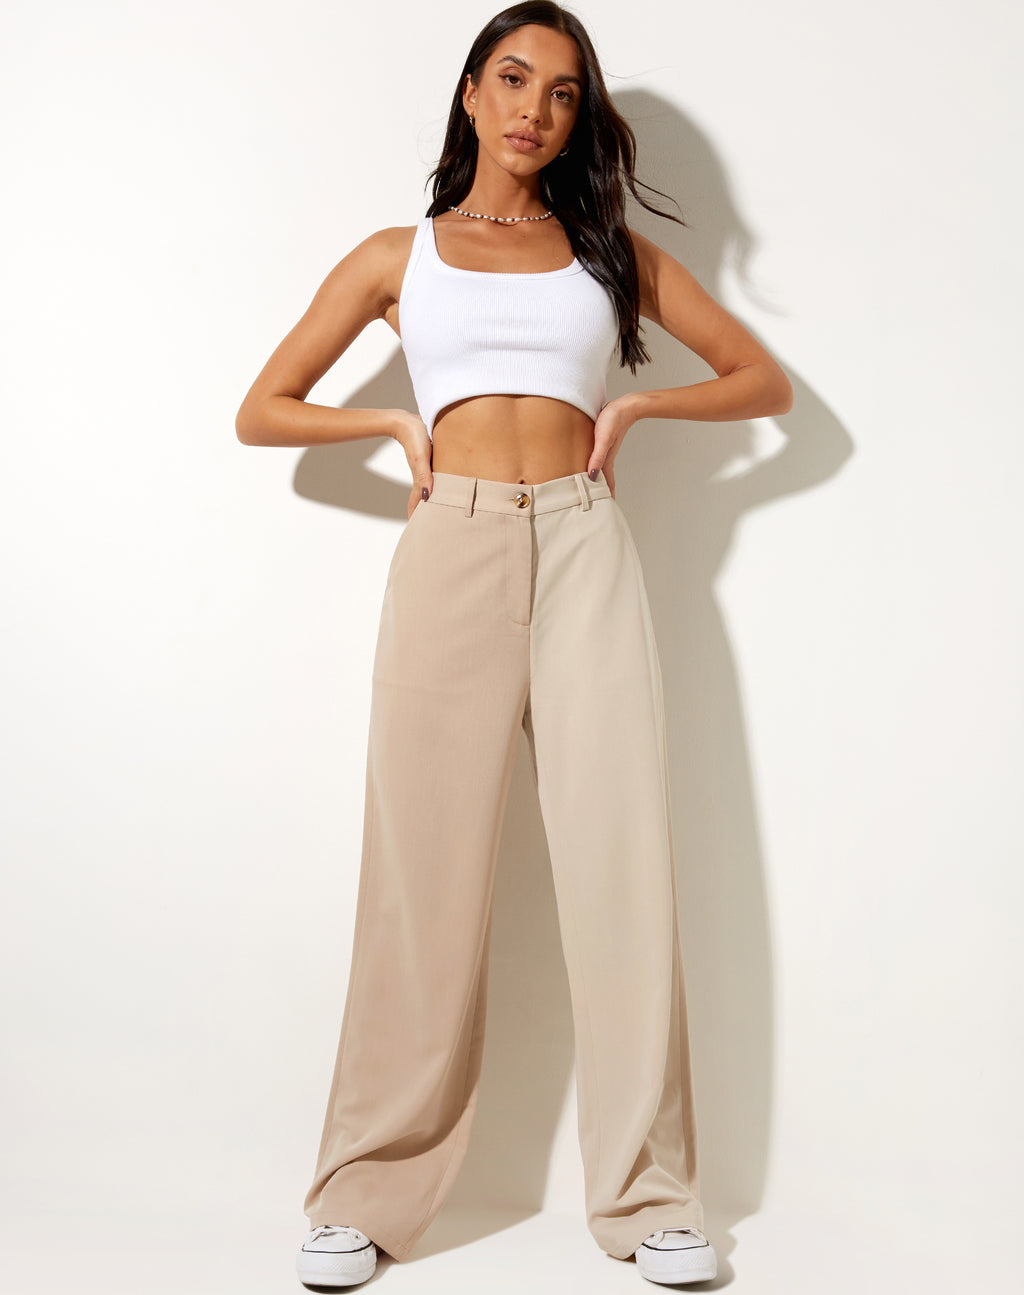 Abba Trouser in Contrast Tan and Beige